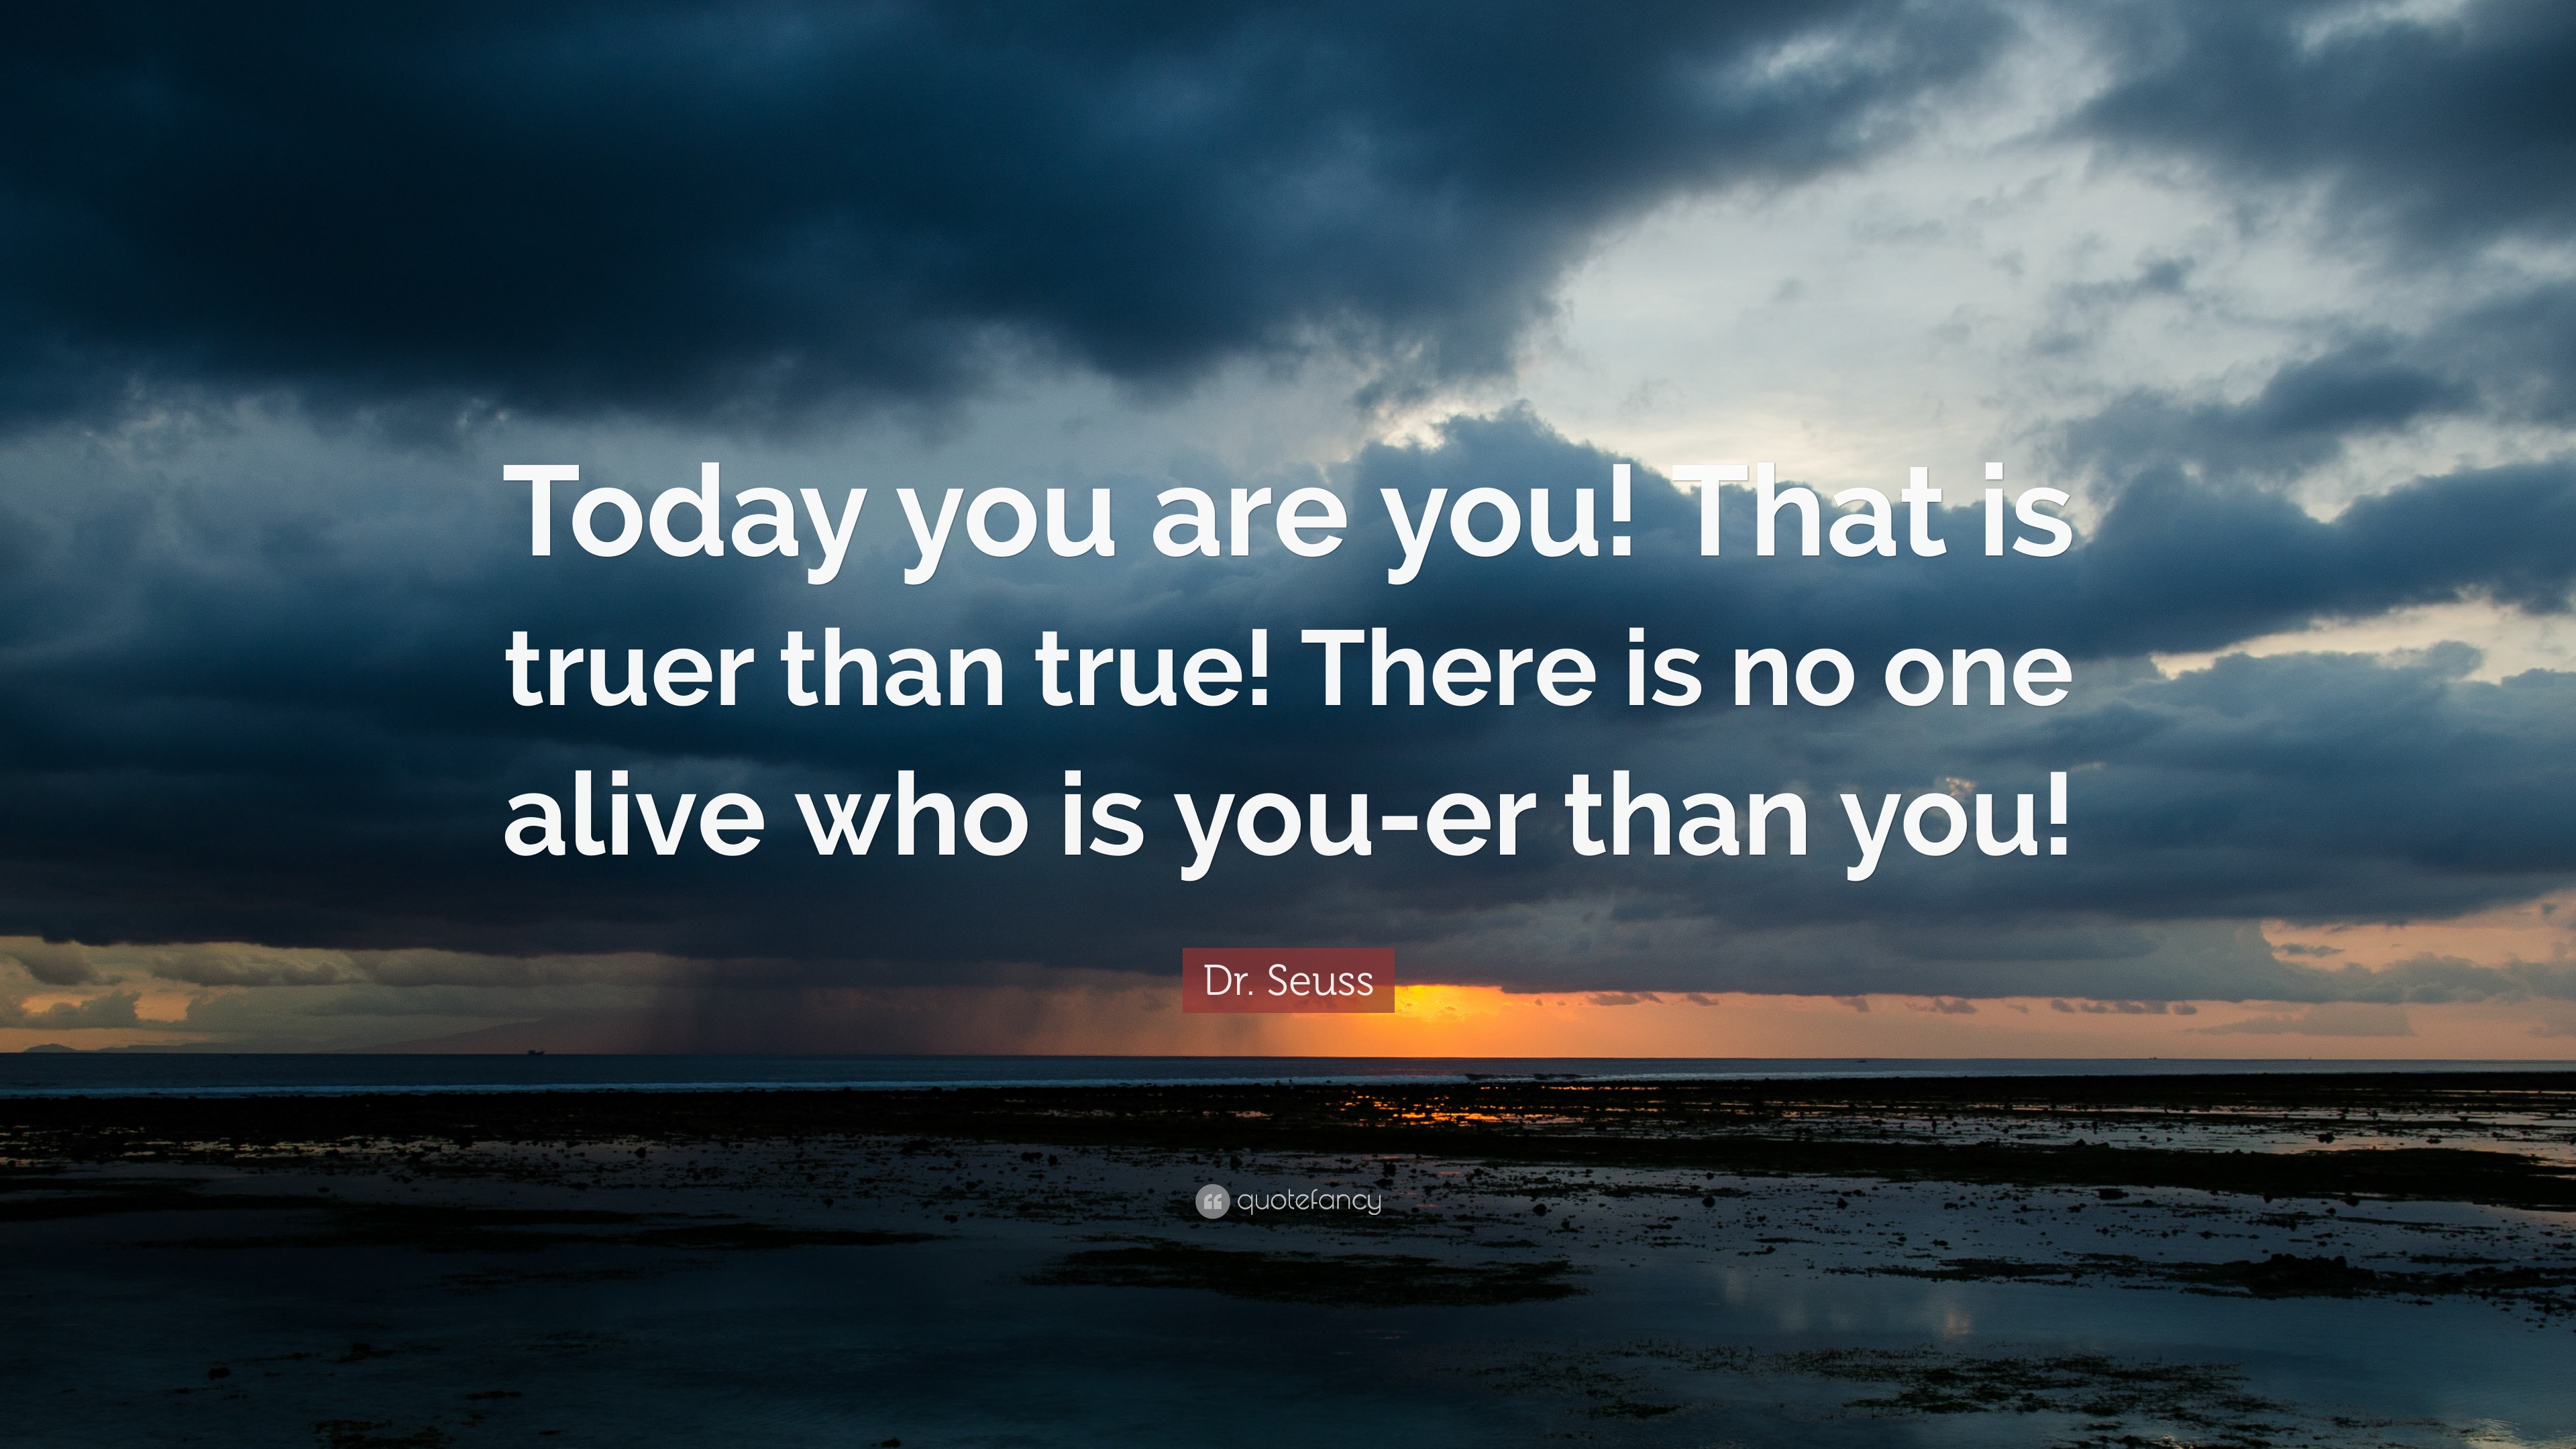 Dr. Seuss Quote: “Today you are you! That is truer than true! There is